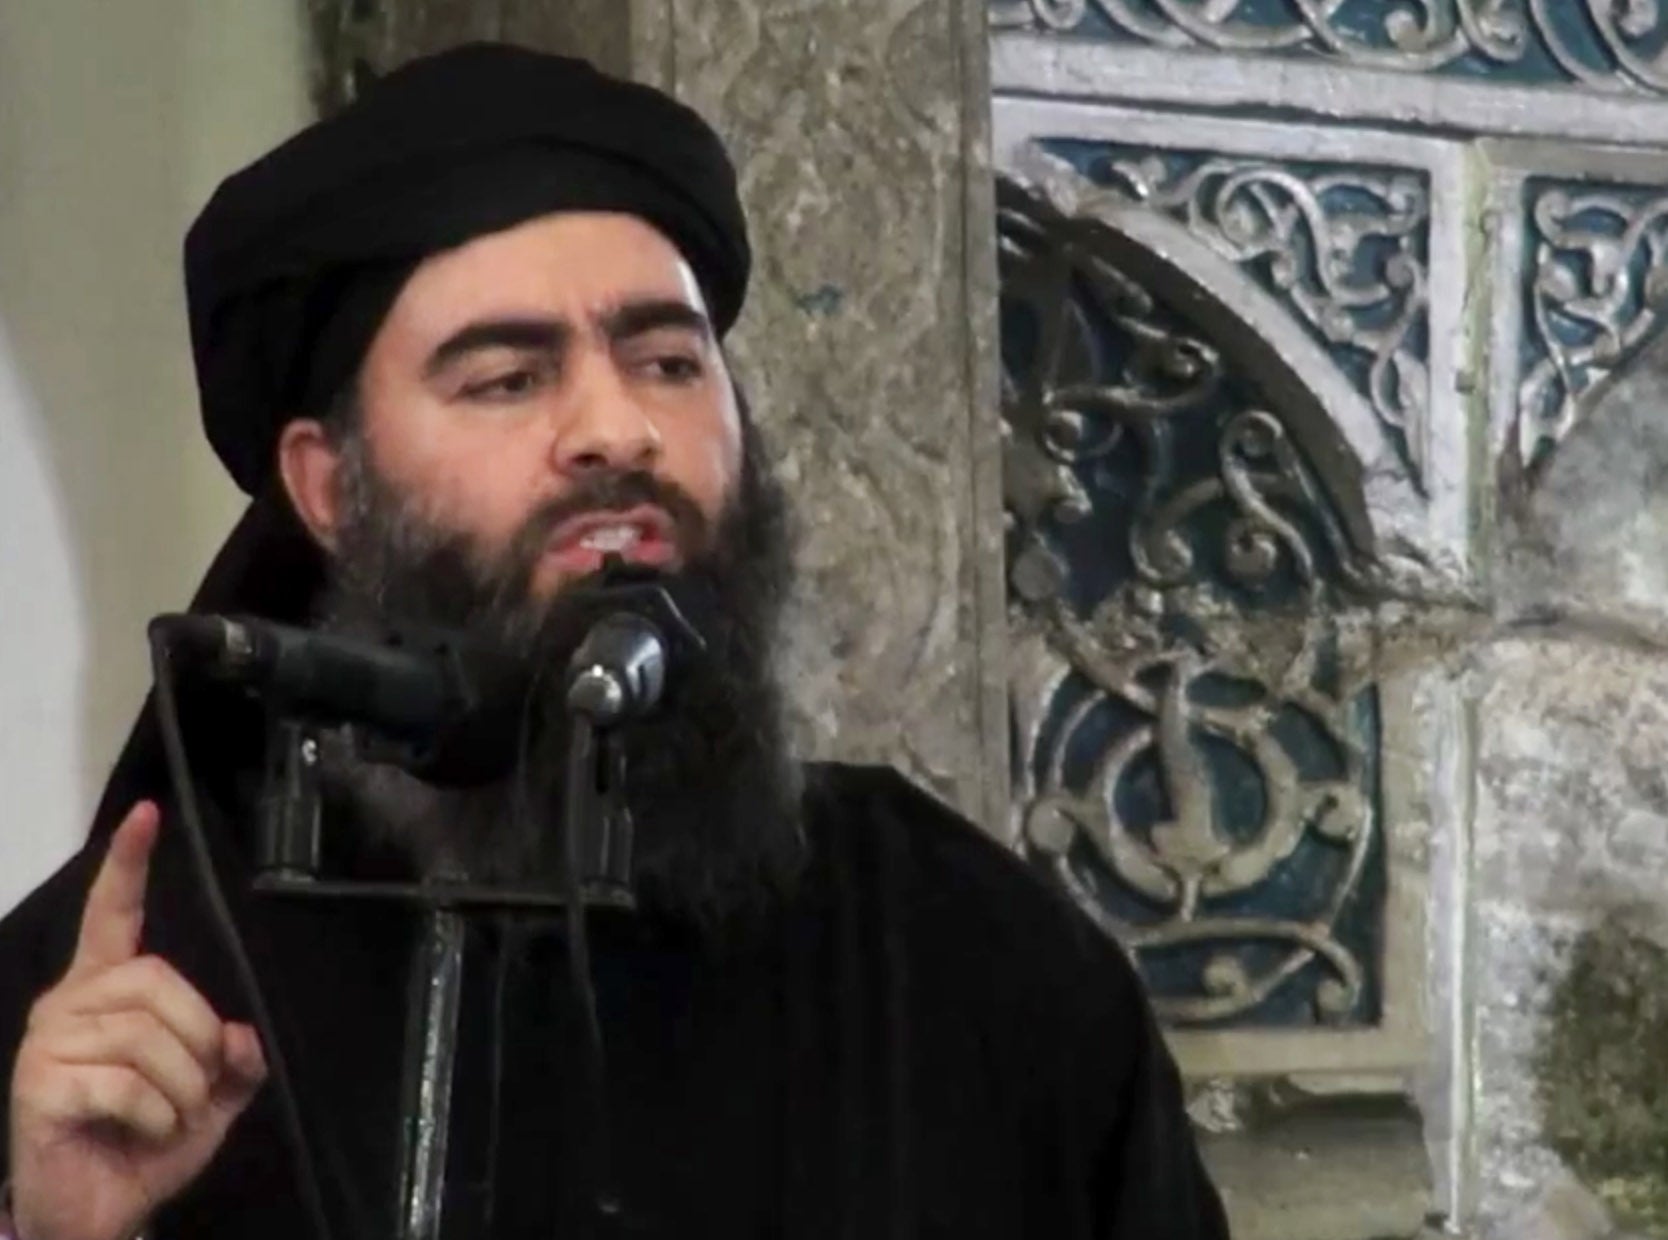 Baghdadi apparently forced himself upon the women living in his house